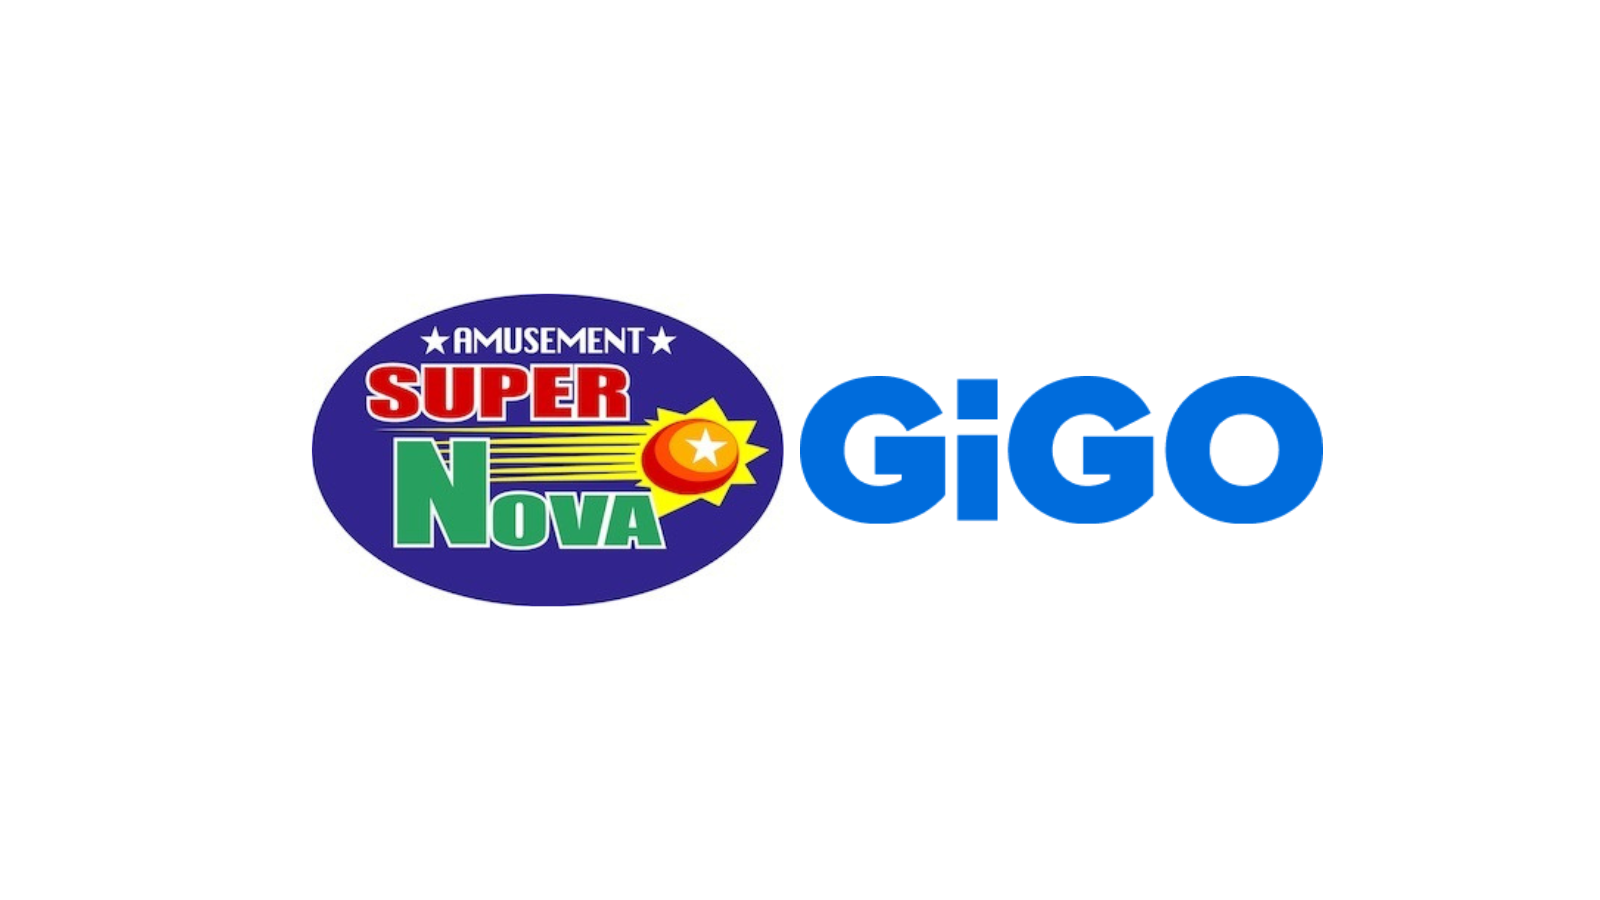 Expansion of the shop network in the Tohoku area! Six “Super Nova” are part of the GENDA Group.